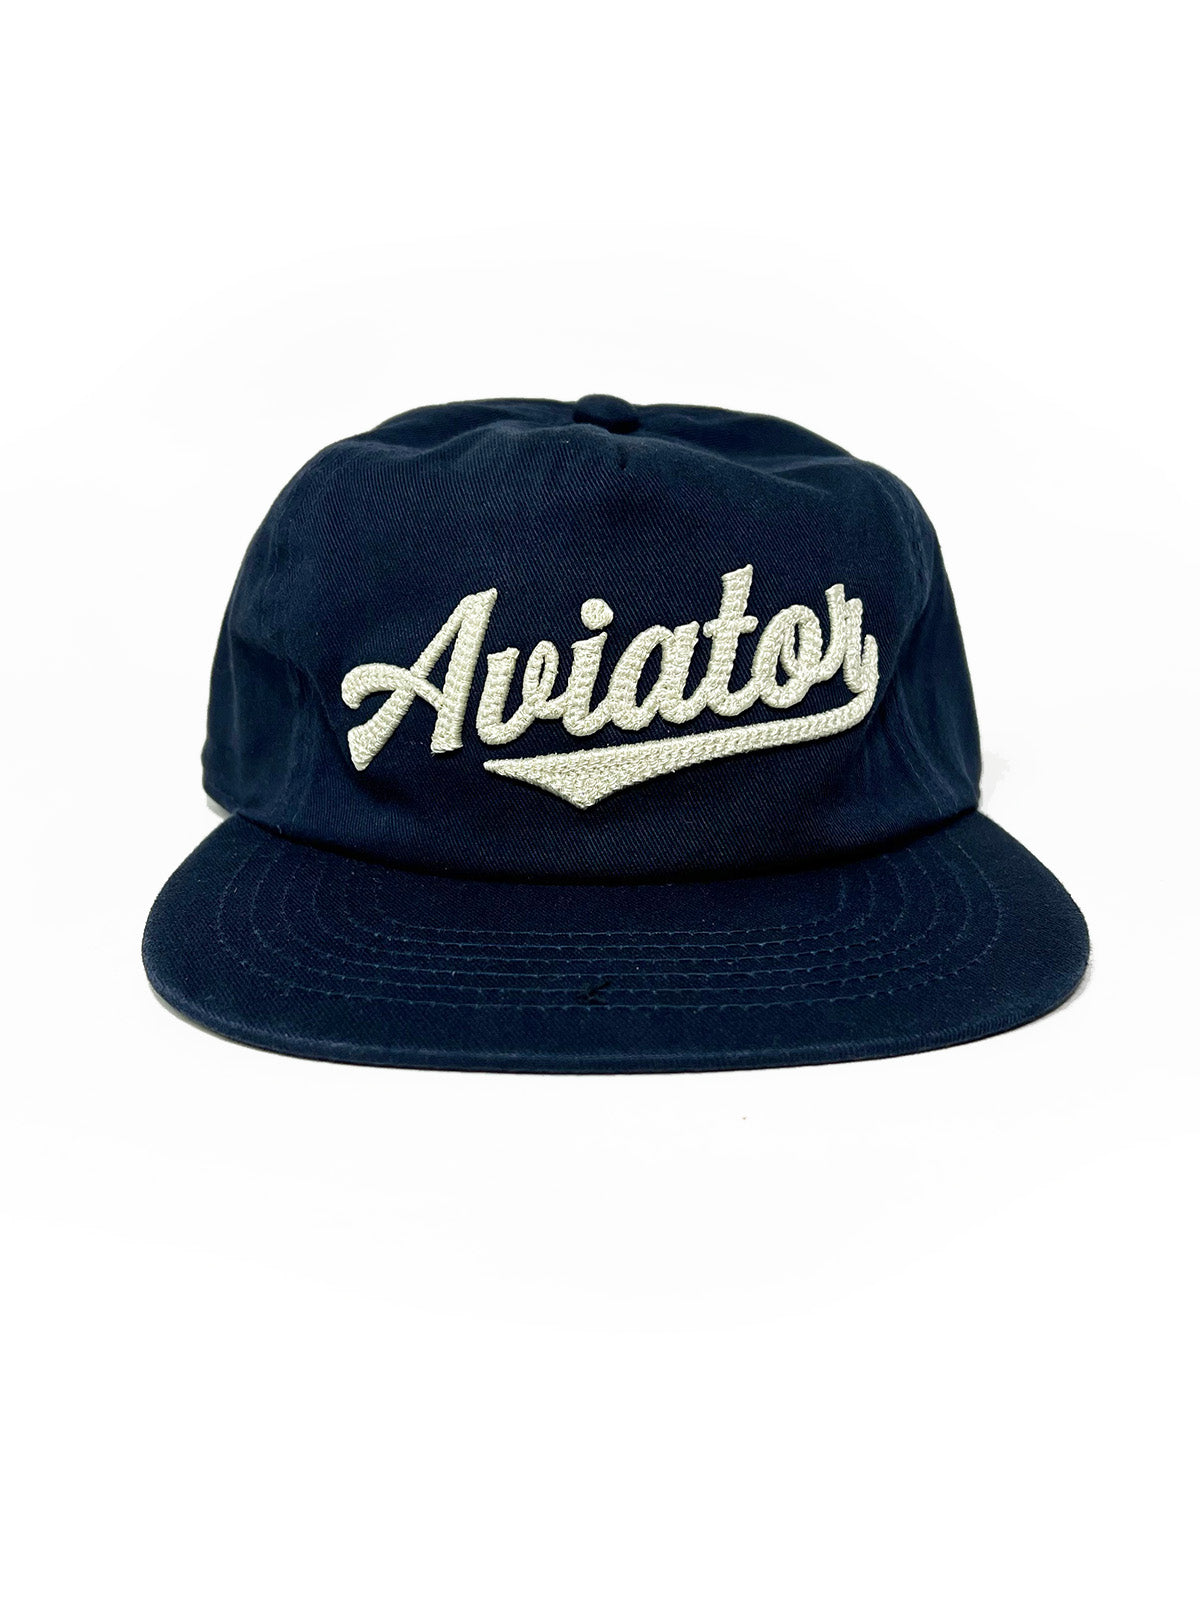 Olive aviator painters cap with ivory script.